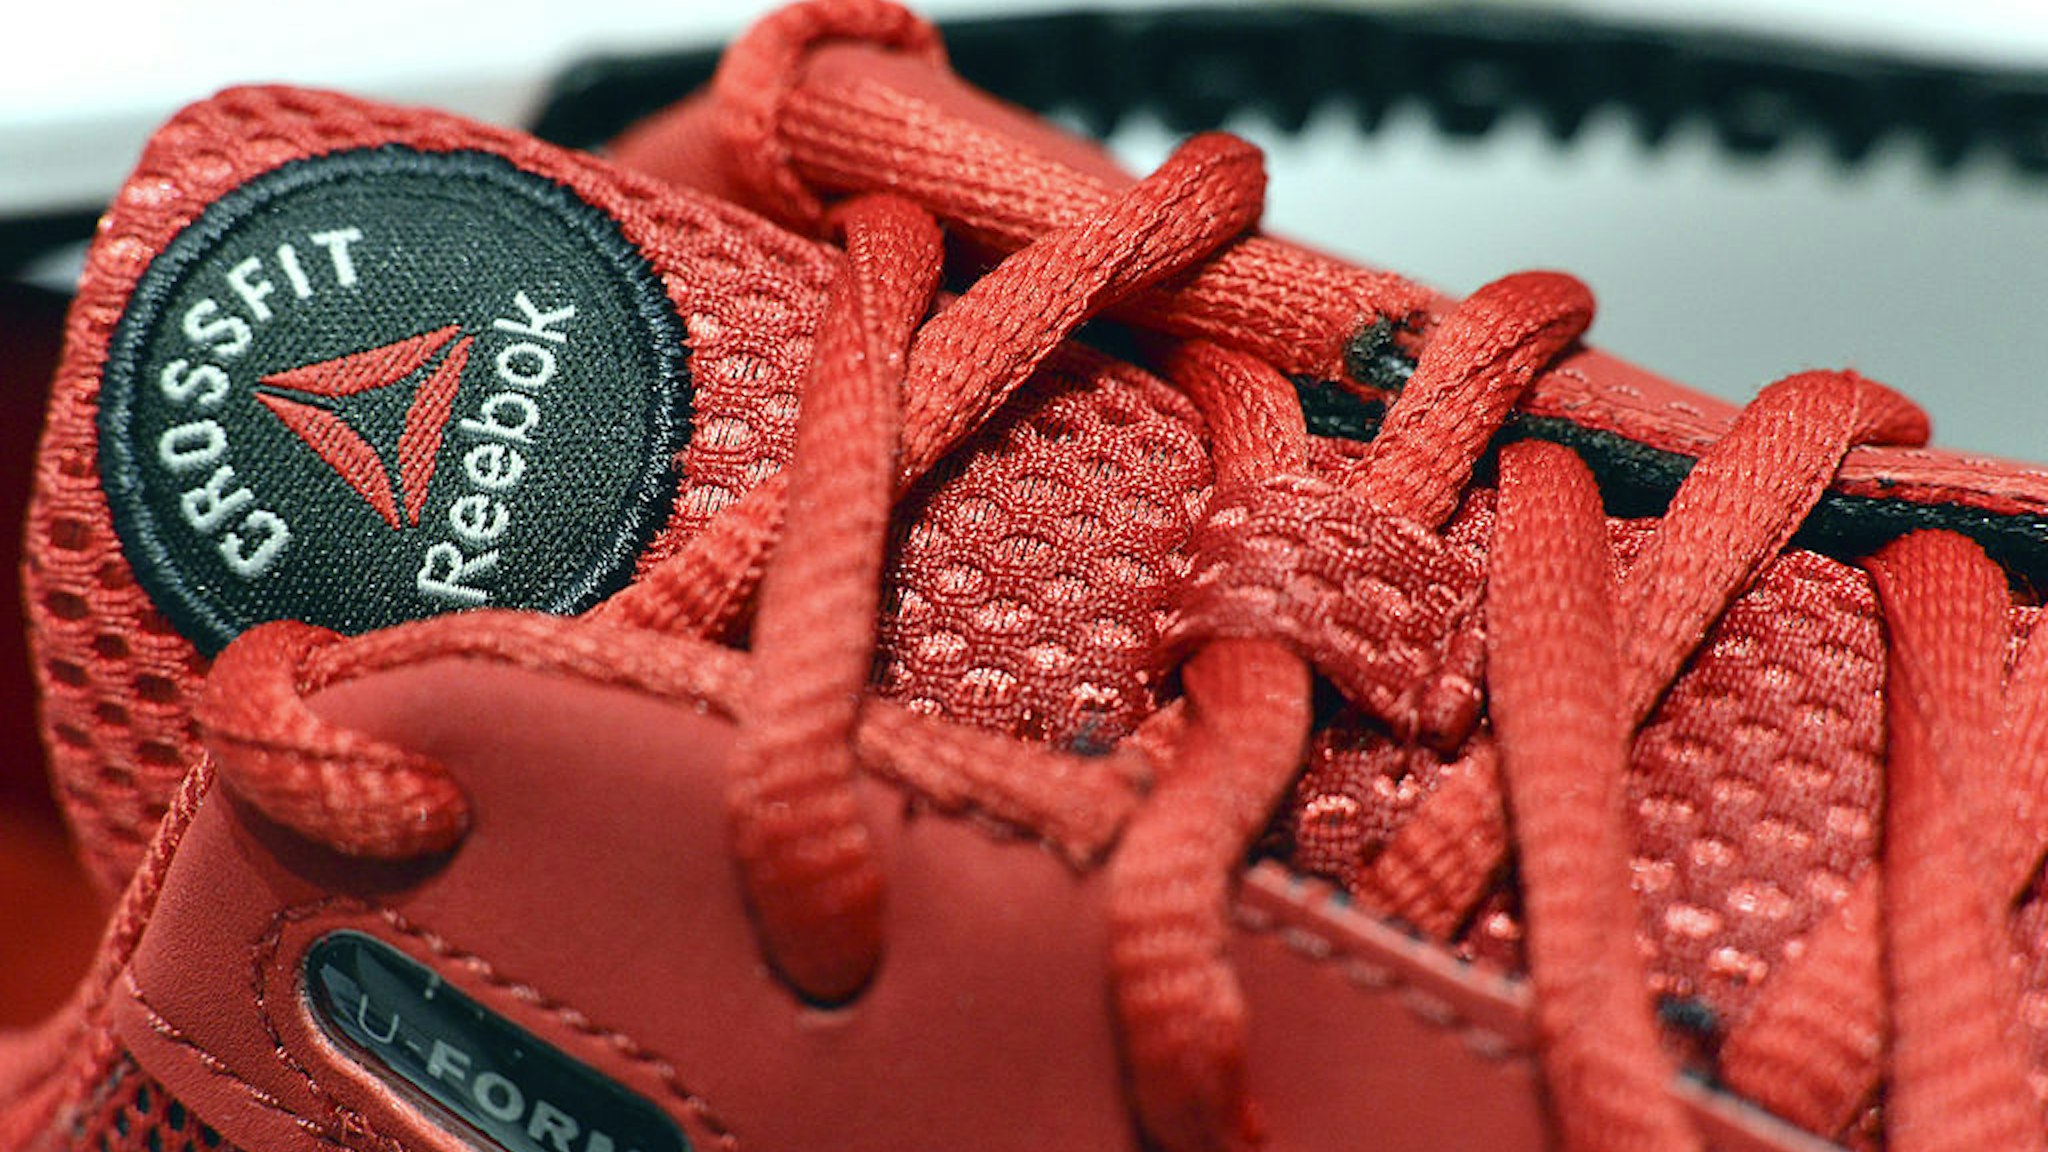 Reebok CrossFit footwear is seen on display during the Adidas AG earnings news conference in Herzogenaurach, Germany, on Thursday, March 7, 2013. Adidas AG, the world's second- largest sporting-goods maker, forecast higher sales and profit this year and raised its dividend by 35 percent as it targets fast-growing emerging markets and introduces new products. Photographer: Guenter Schiffmann/Bloomberg